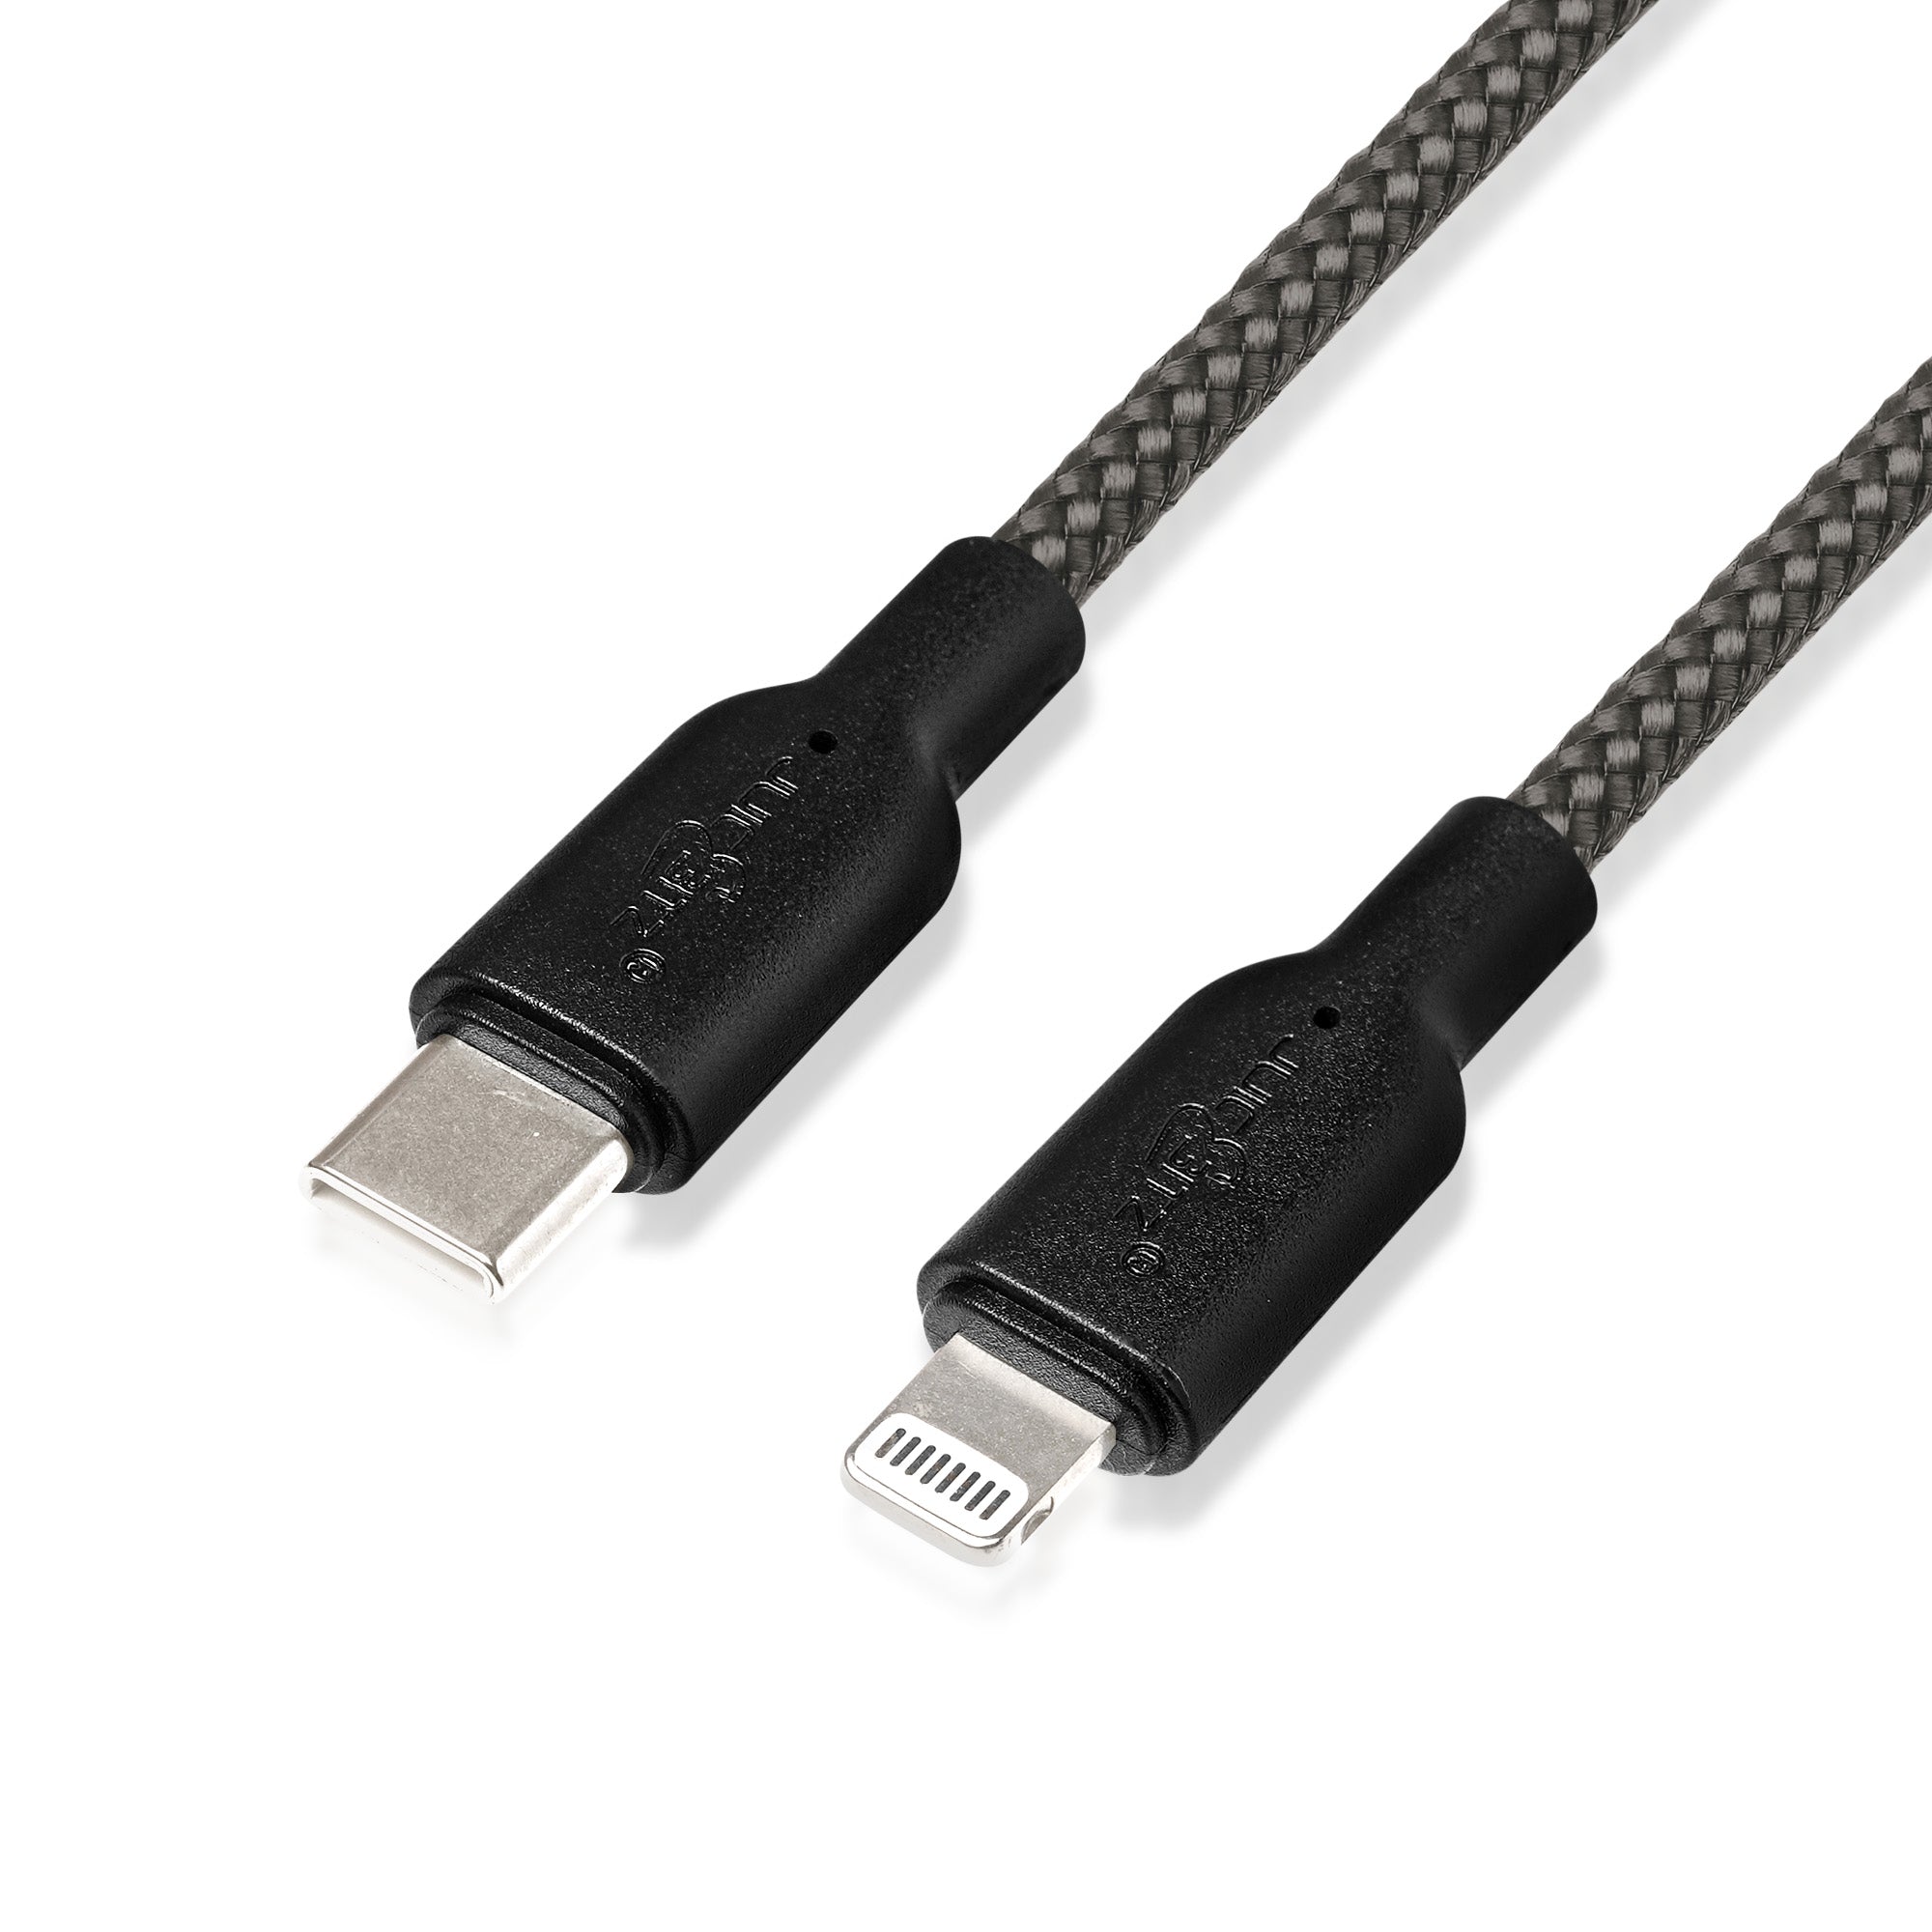 Braided Heavy Duty USB-C Fast Charger Data Sync Cable for iPhone, iPad, iPod - Grey